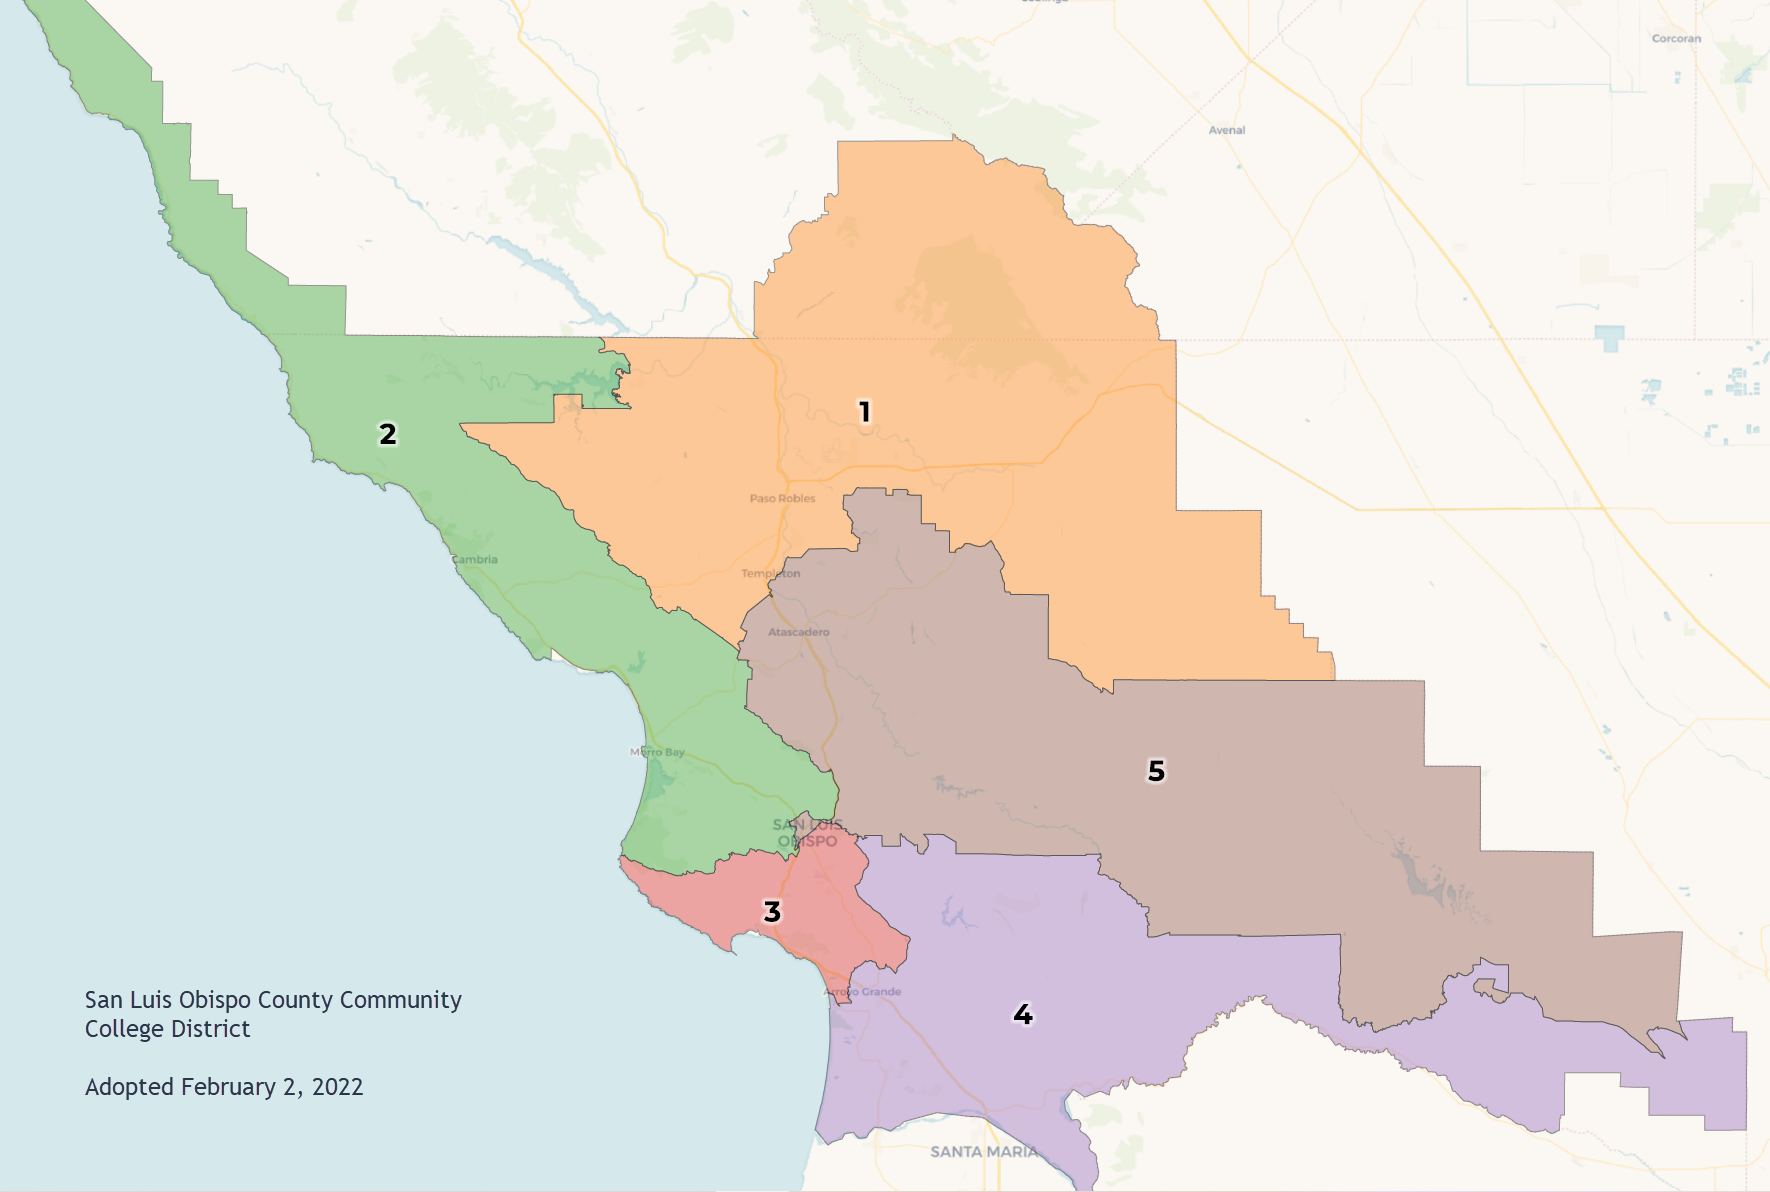 San Luis Obispo County Community College Disrict with Deliniated Trustee Areas